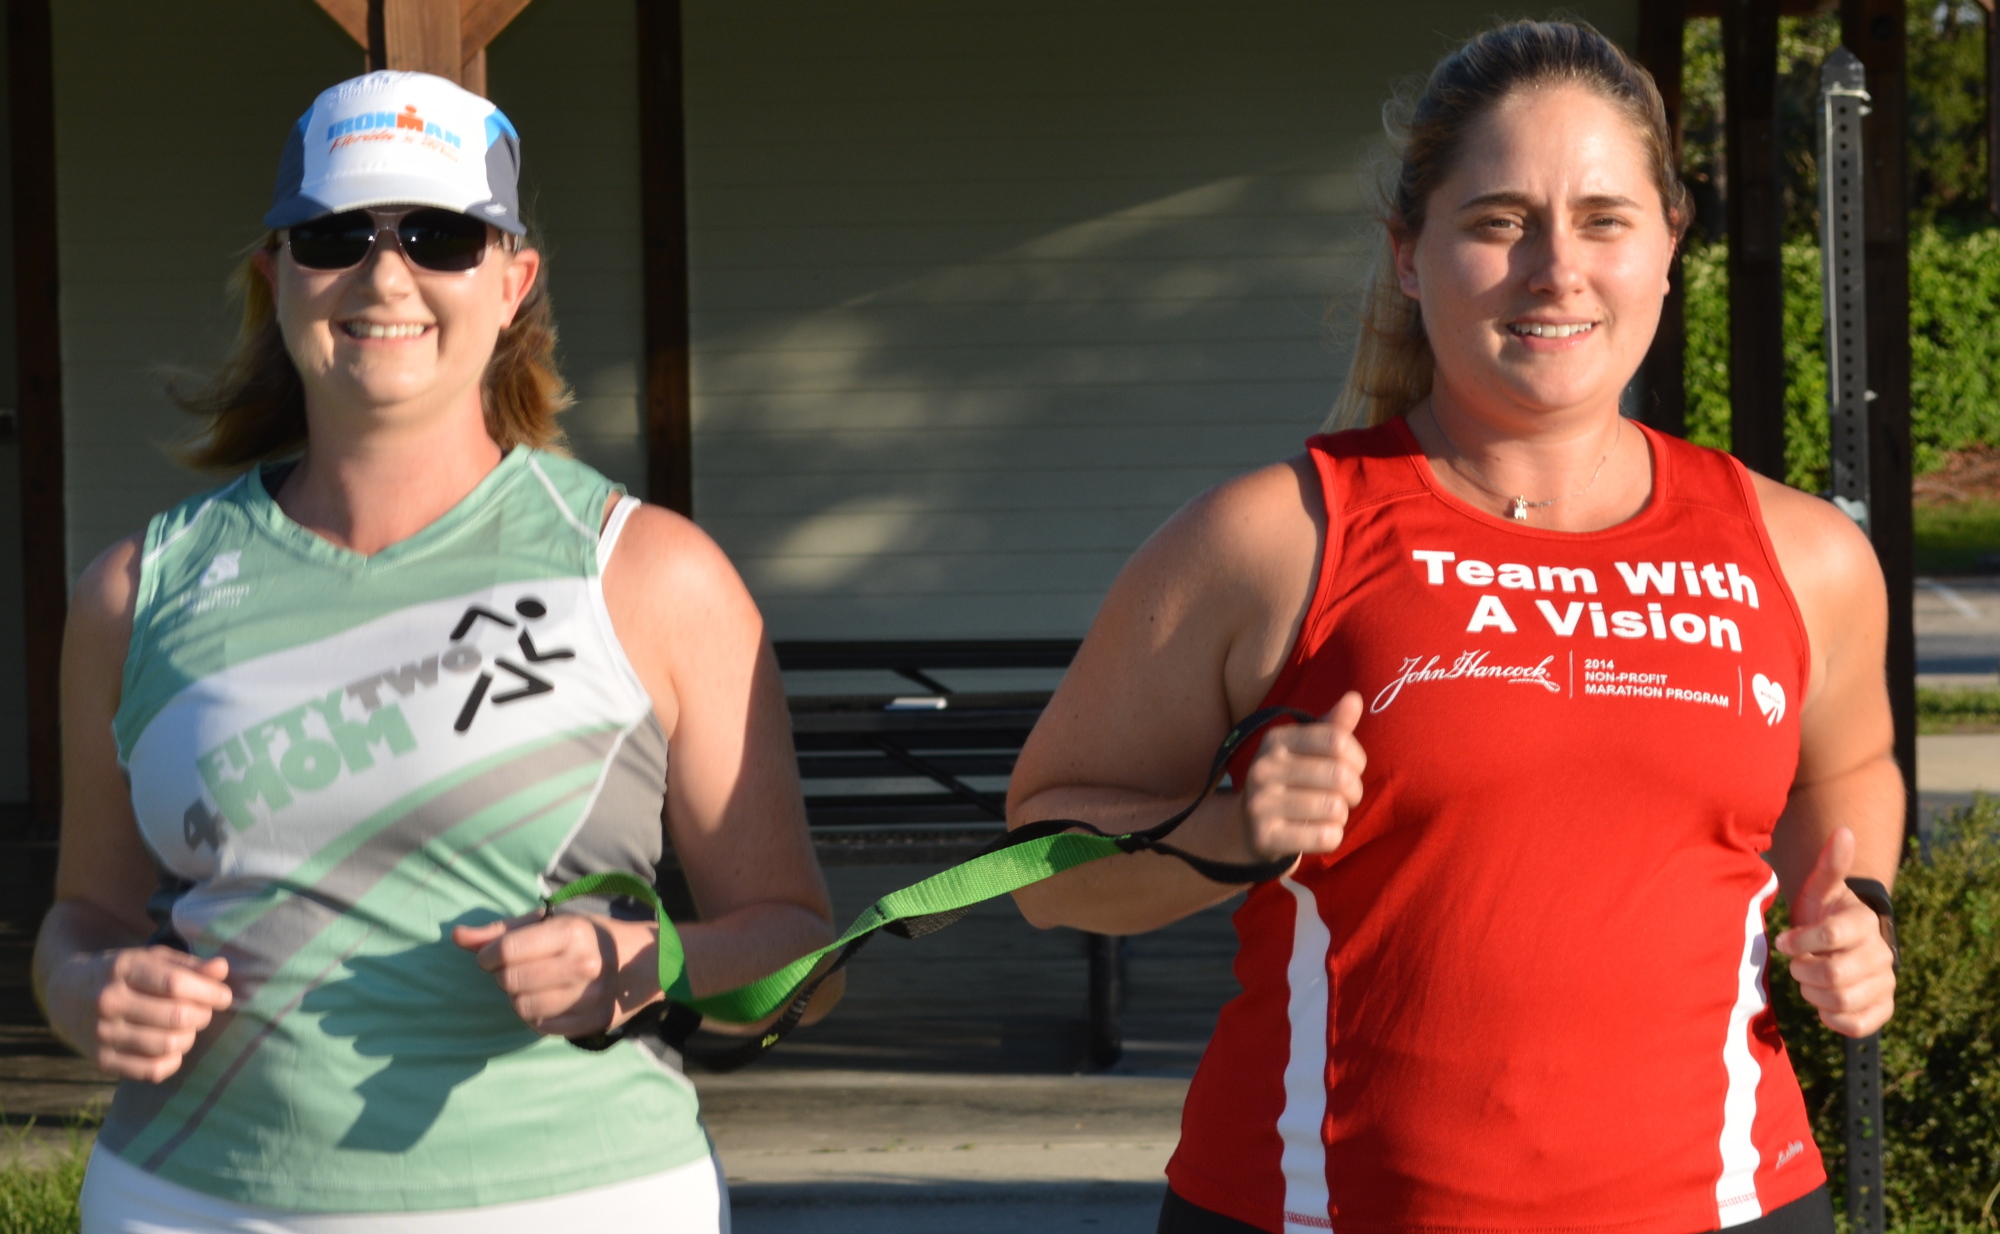 Rebecca Nickens runs alongside her sister, Rachel Weeks, with a strap connecting them during races.